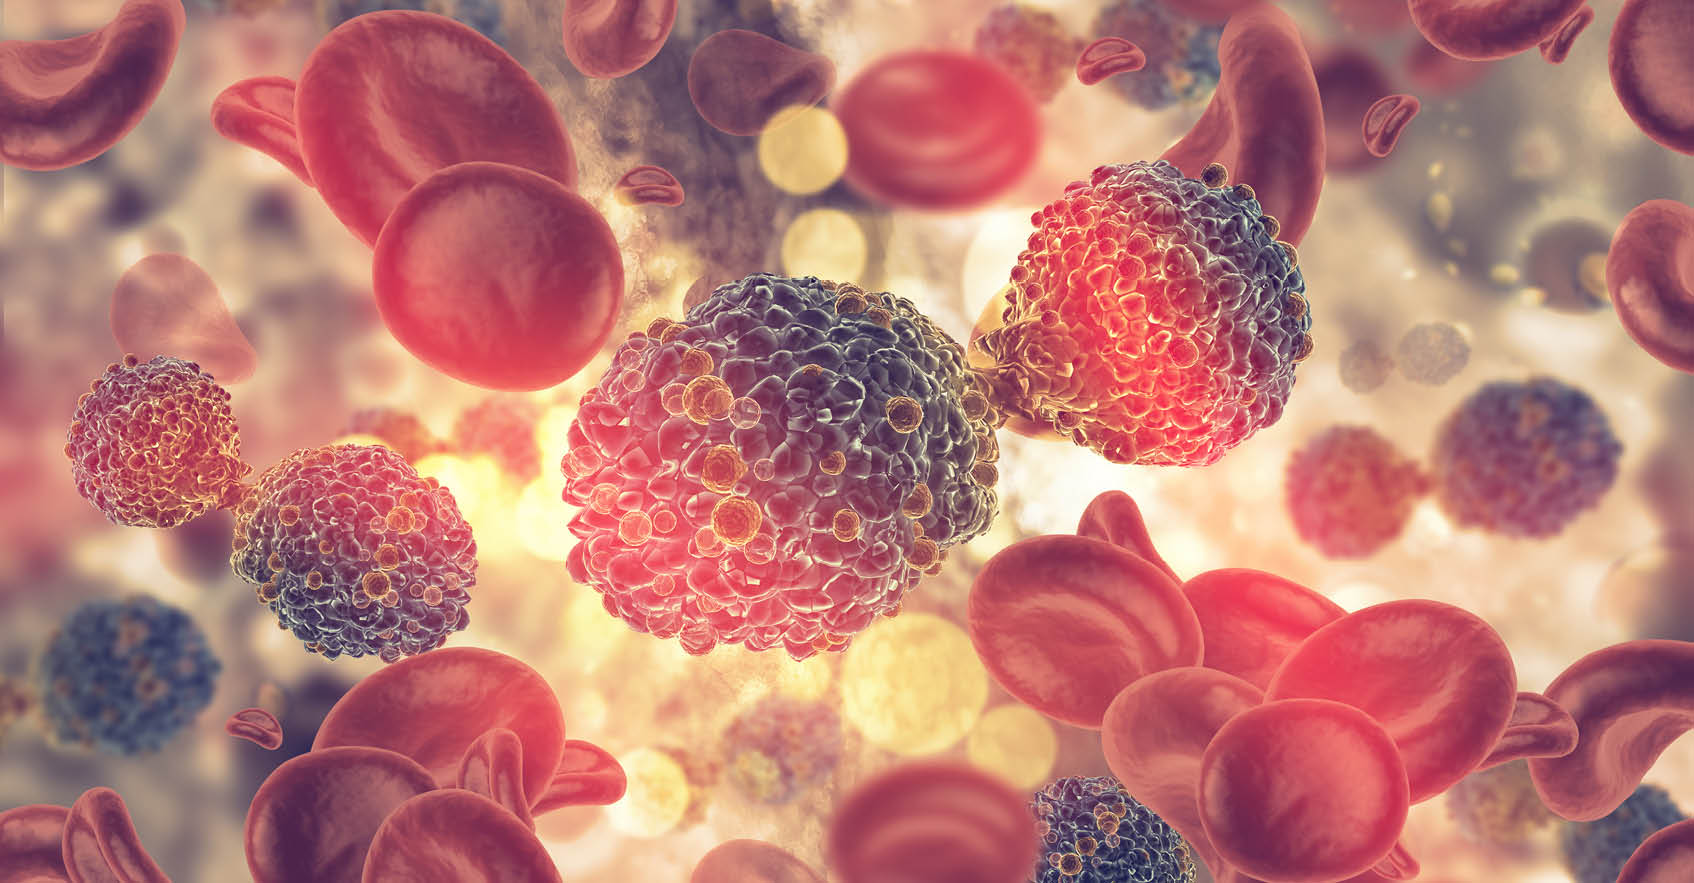 Microscopic view of Multiple Myeloma (MM) cells surrounding healthy red blood cells (RBCs) that are circulating in a blood vessel.